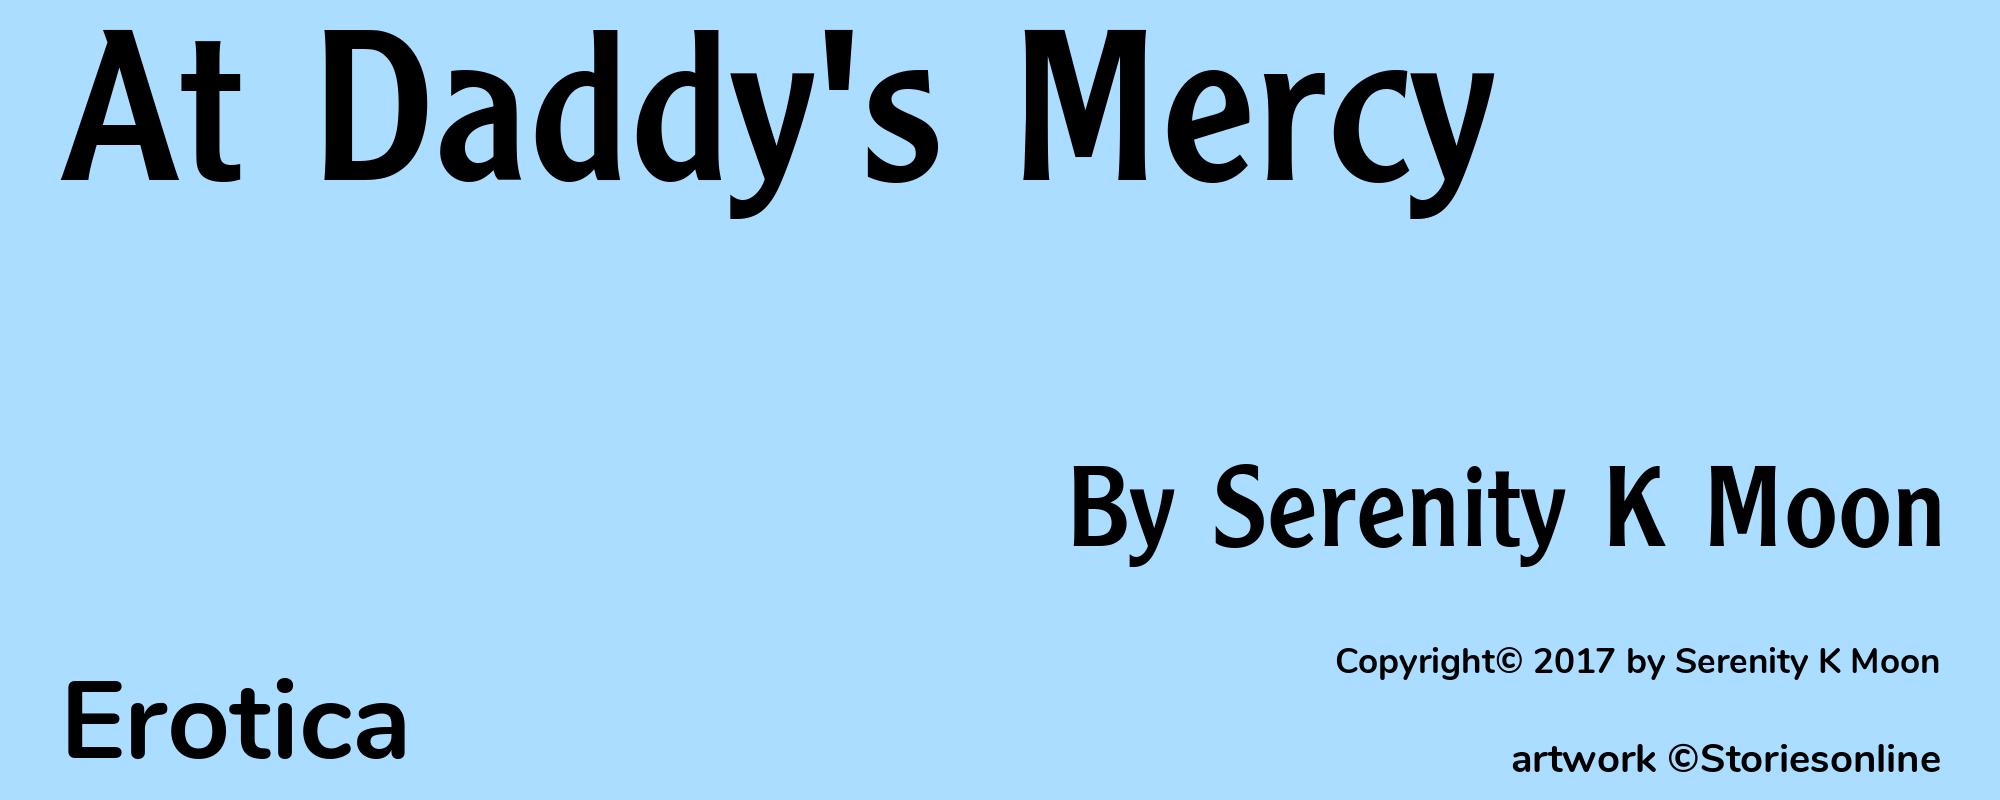 At Daddy's Mercy - Cover